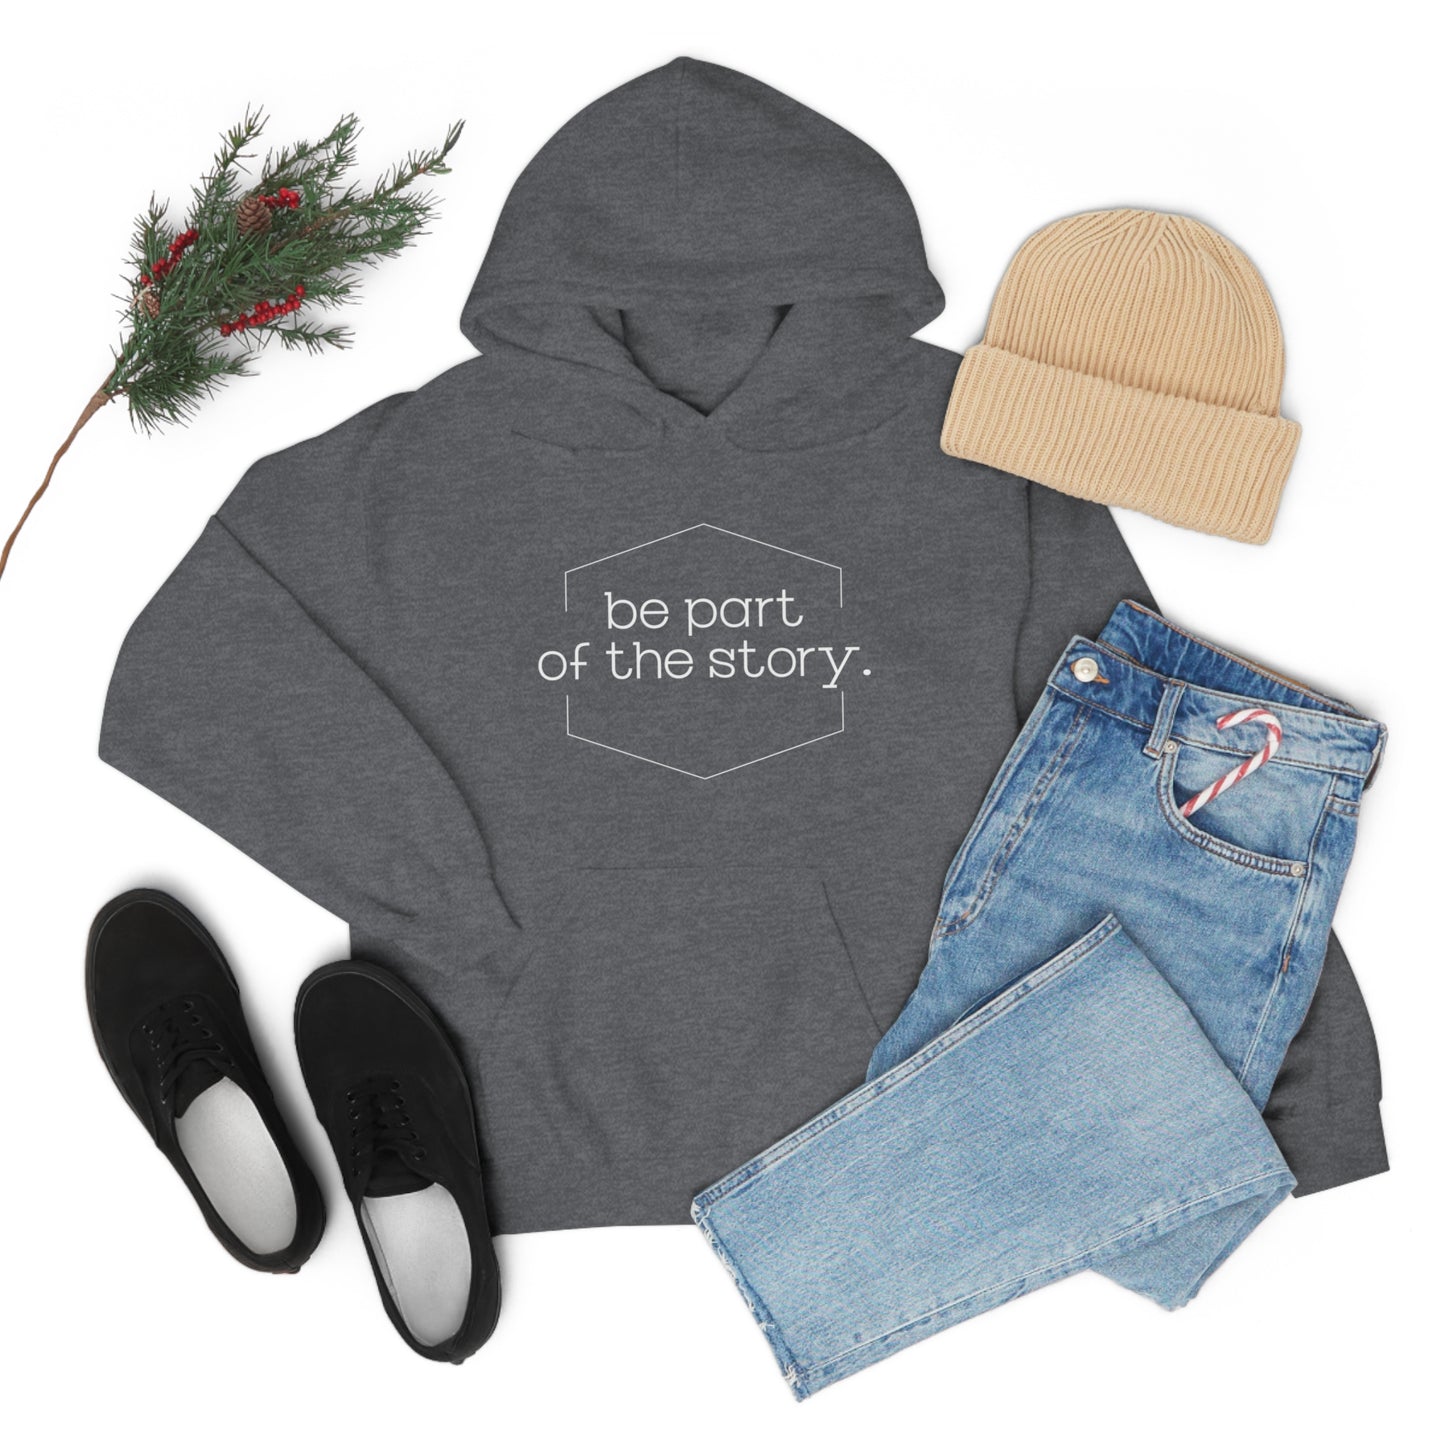 Be Part of the Story English Hooded Sweatshirt